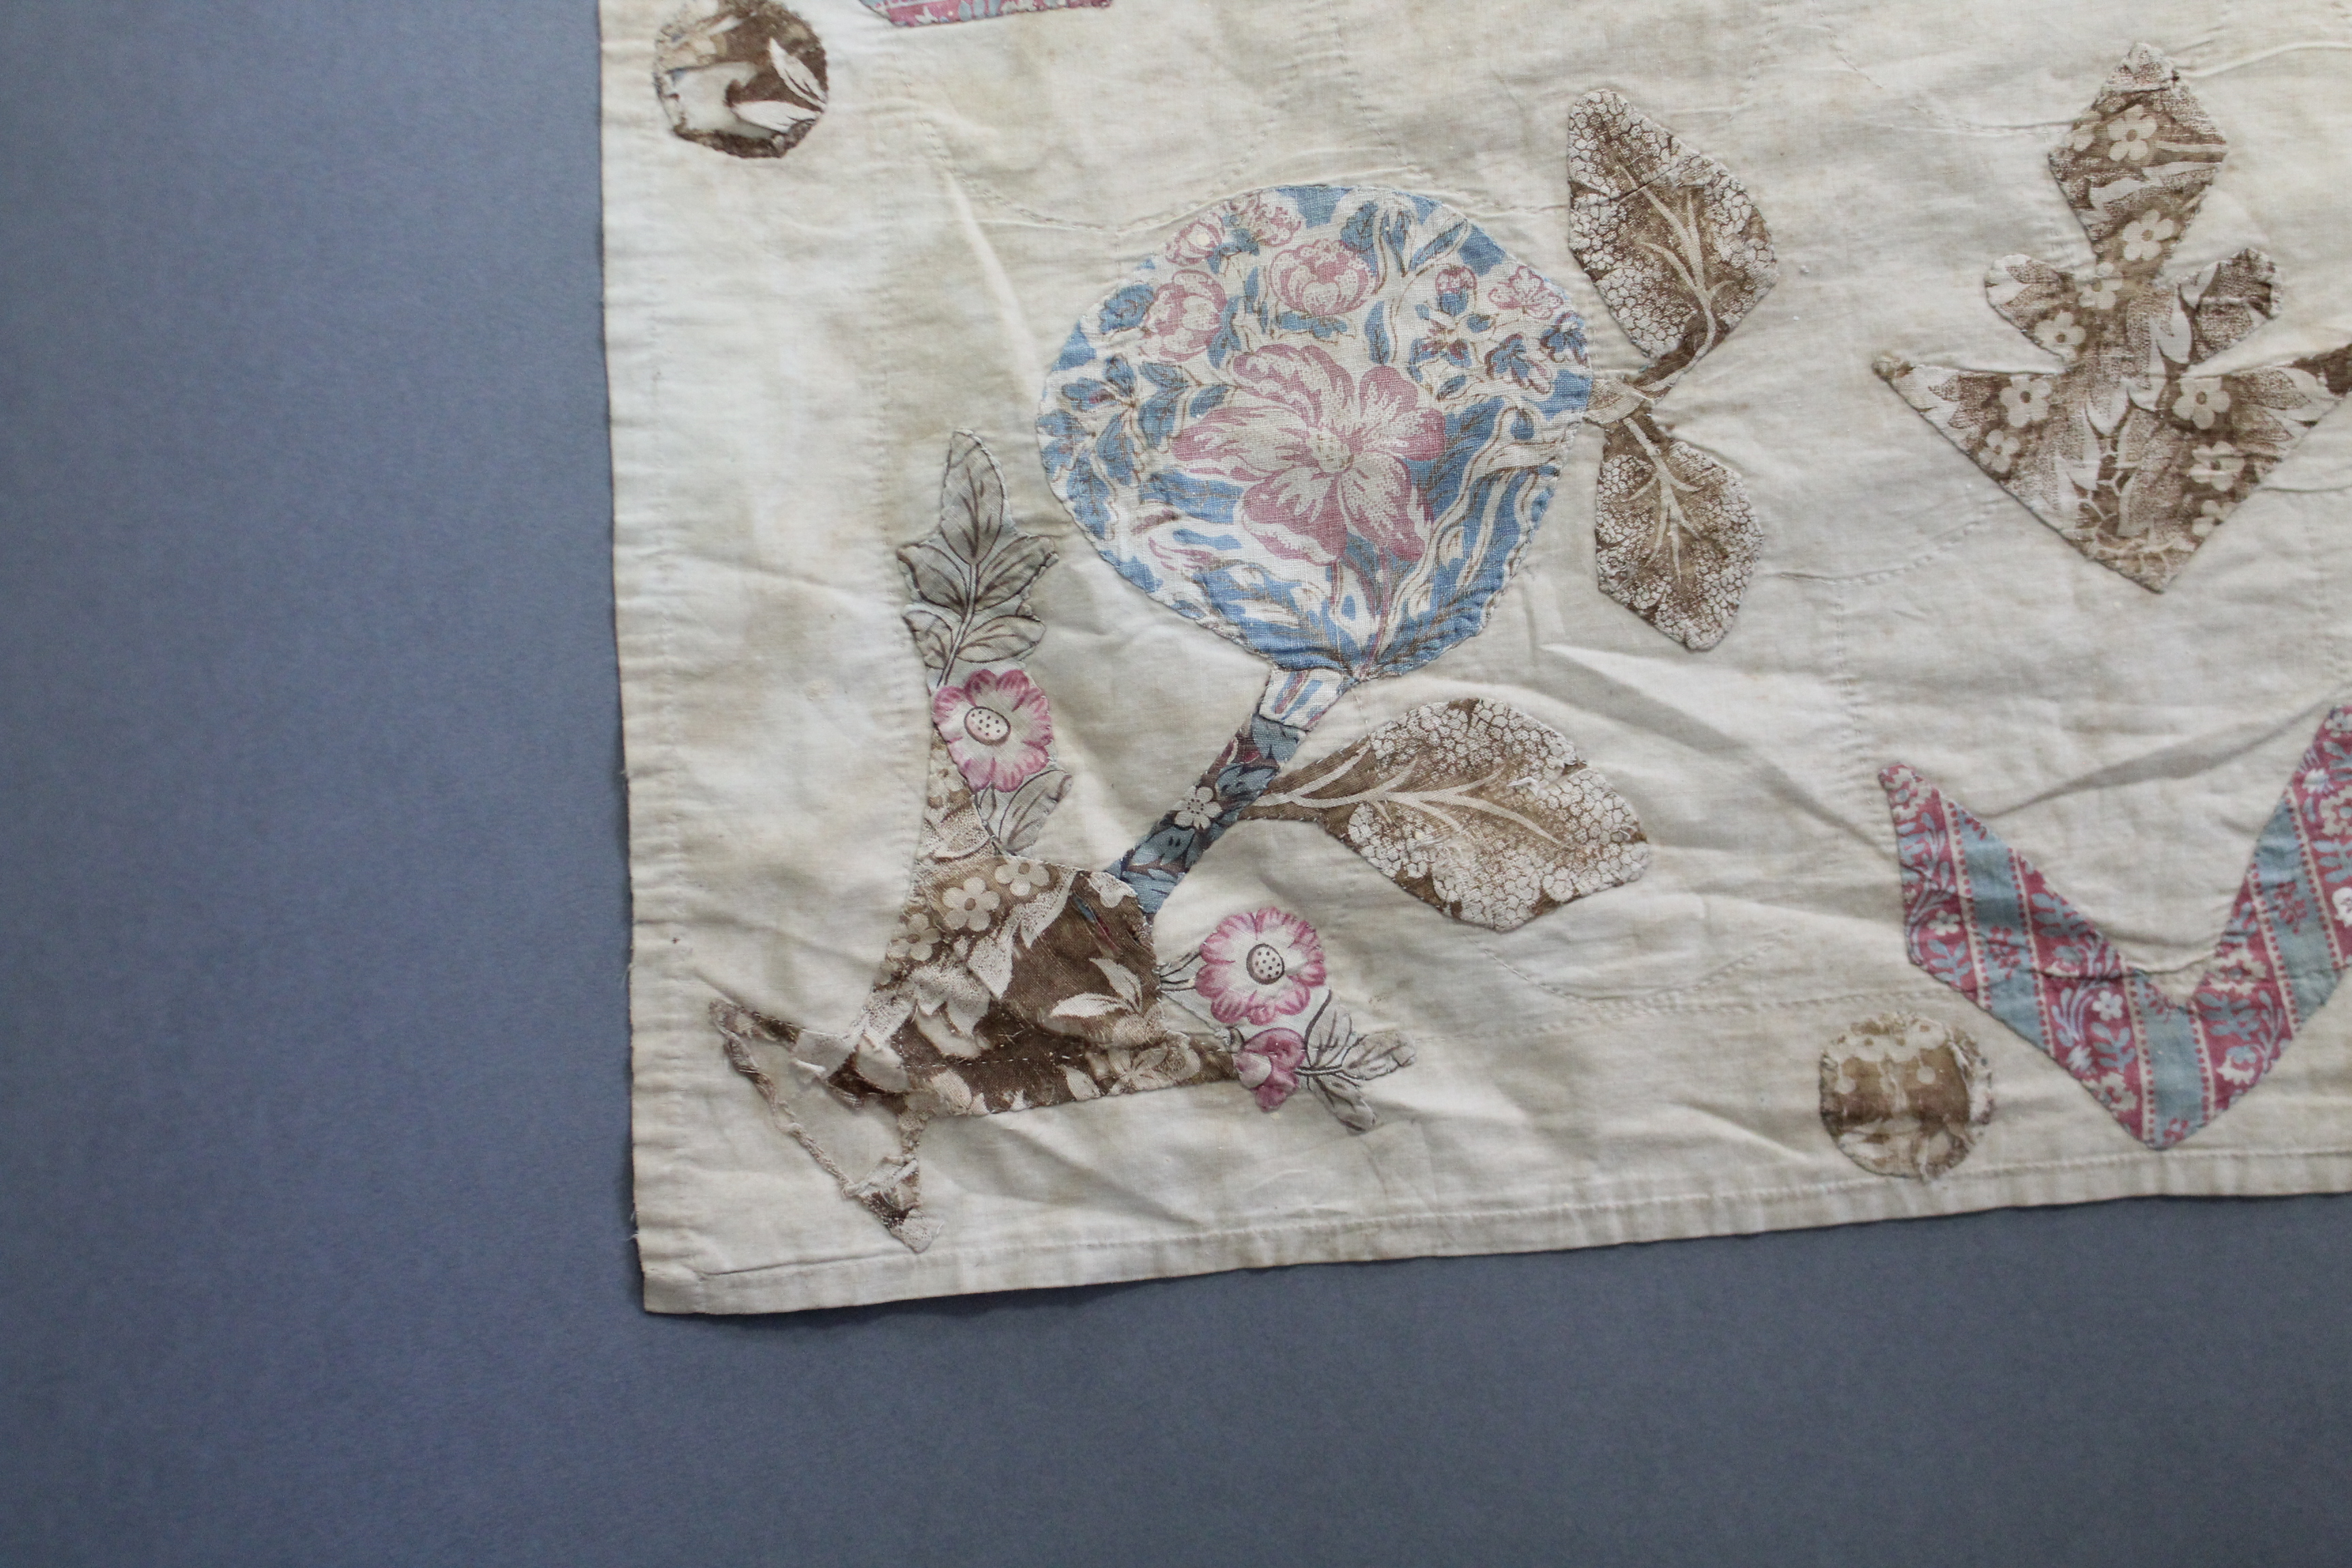 ROYAL INTEREST: AN EARLY 19th century PATCHWORK BEDSPREAD reputedly by Princess Charlotte of - Image 11 of 12